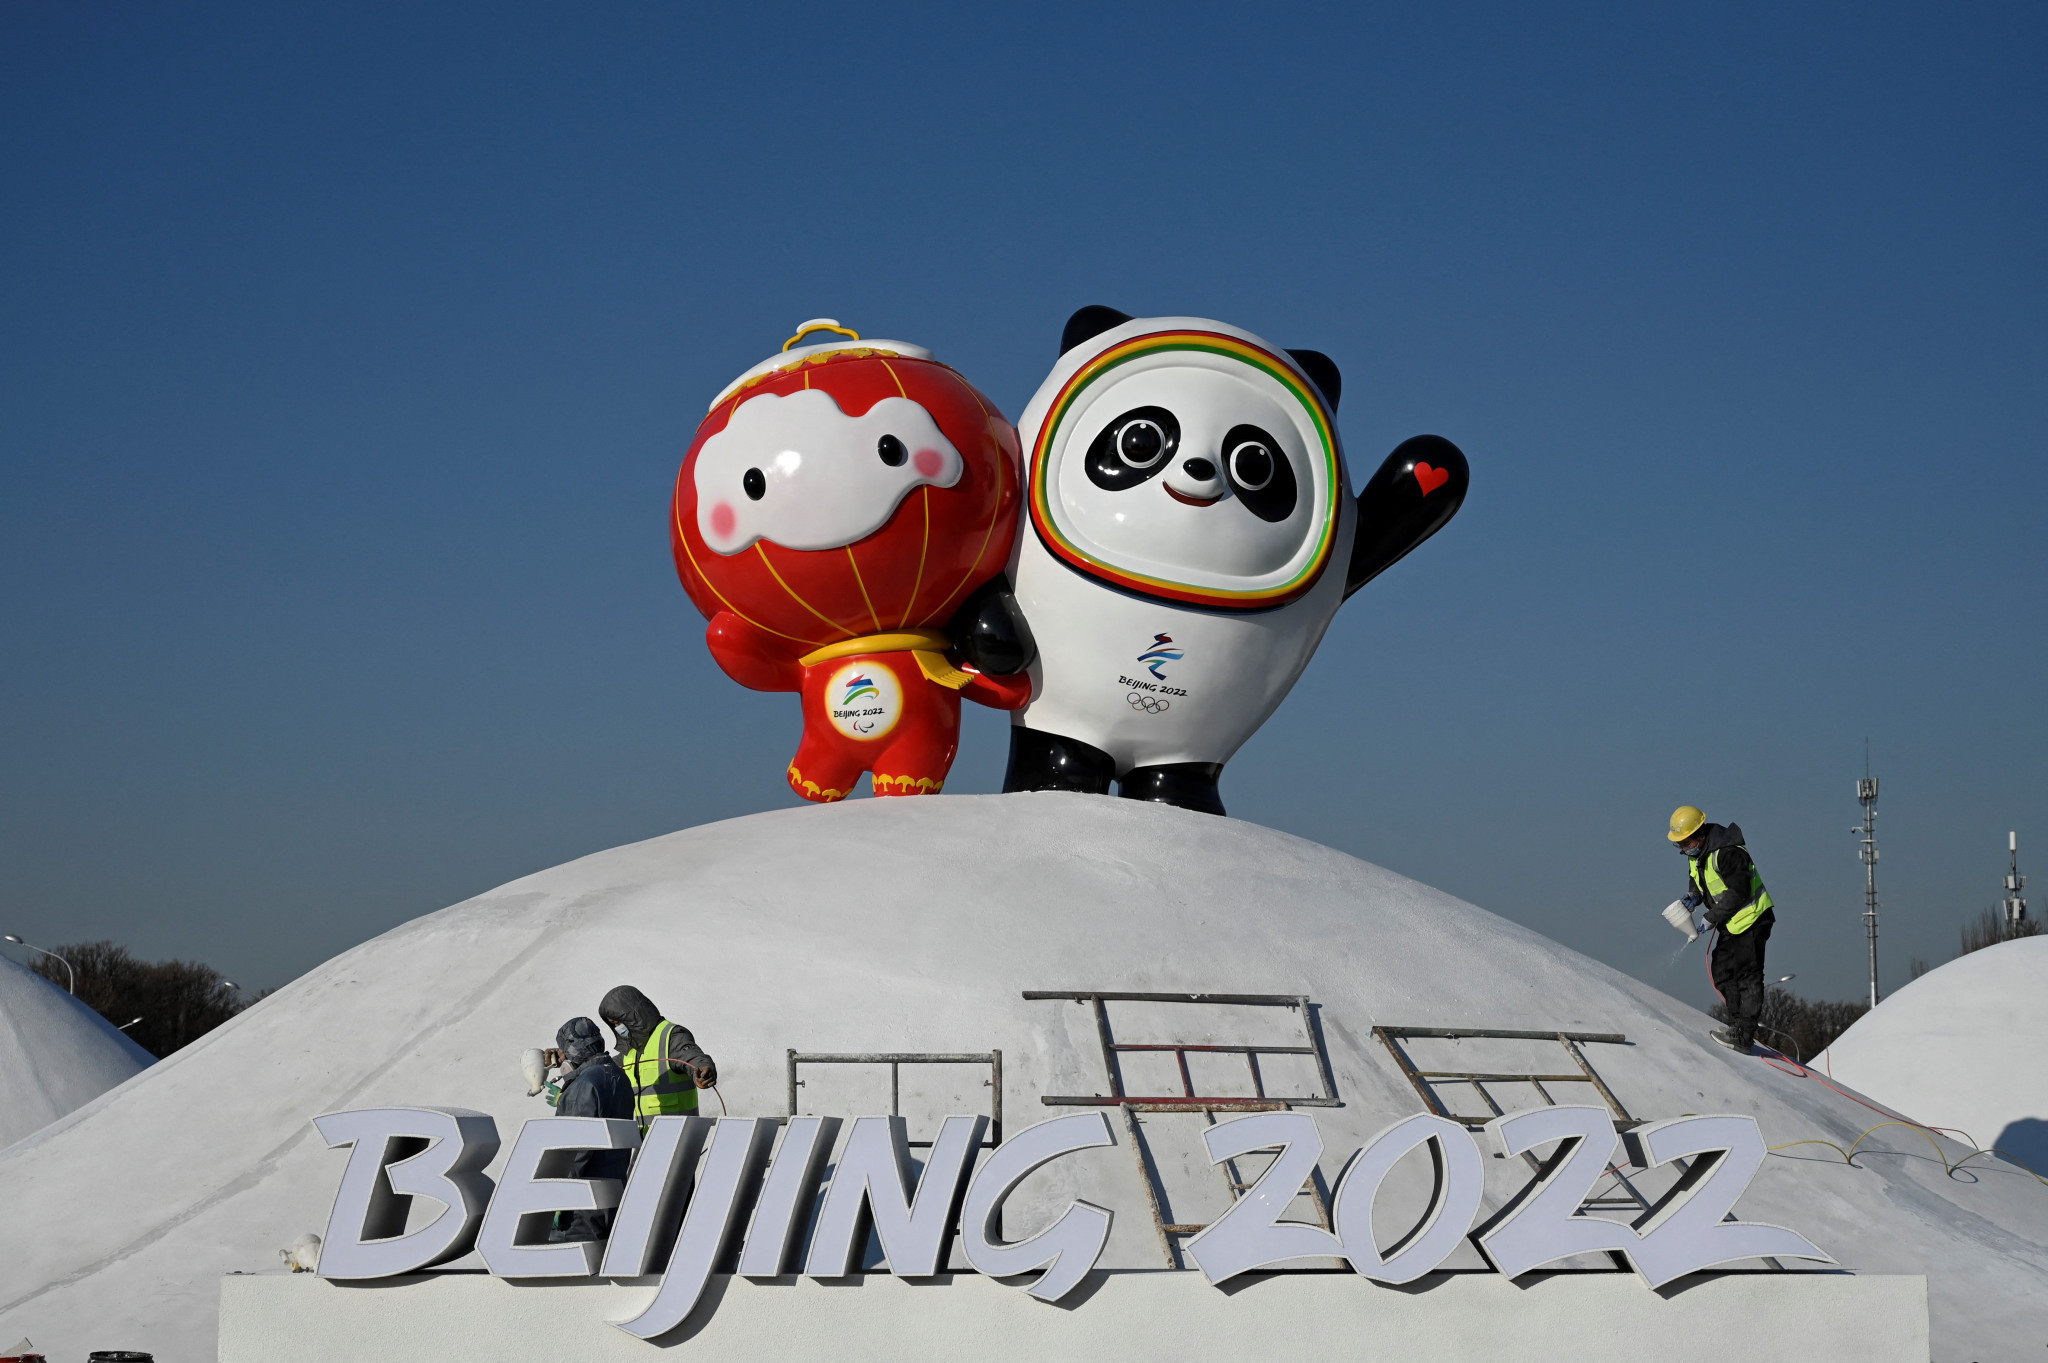 Mascots proved popular and sold out quickly at last month's Beijing 2022 Winter Olympics ©Getty Images